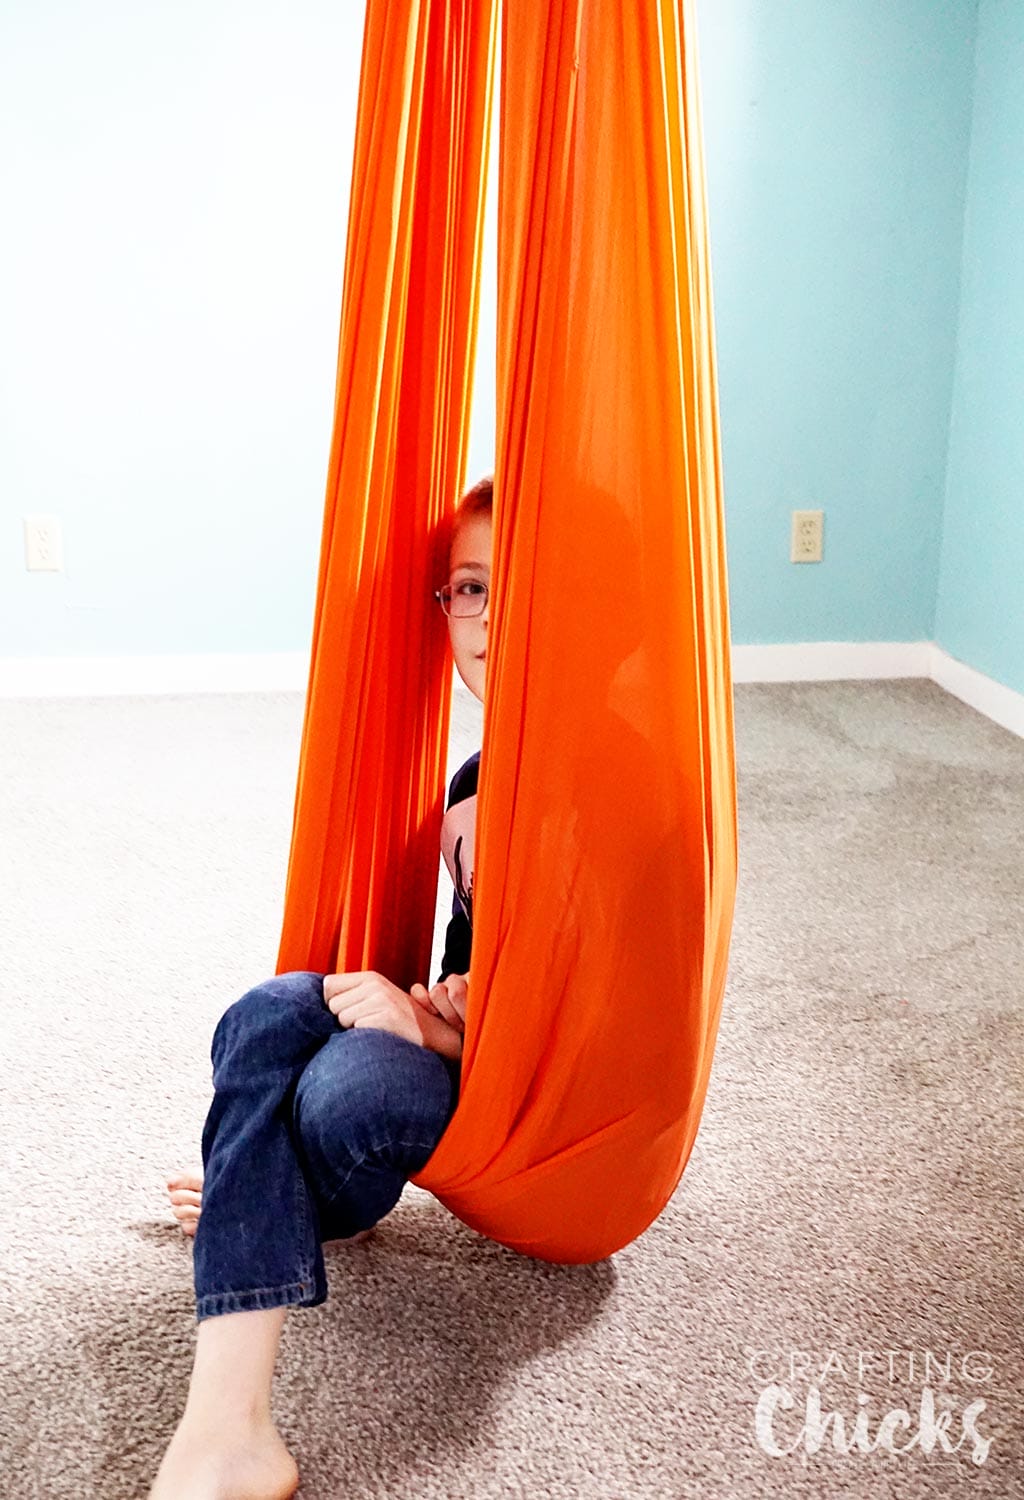 SPD Therapy Swing - What you need to set up a therapy gym at home for sensory processing disorder.